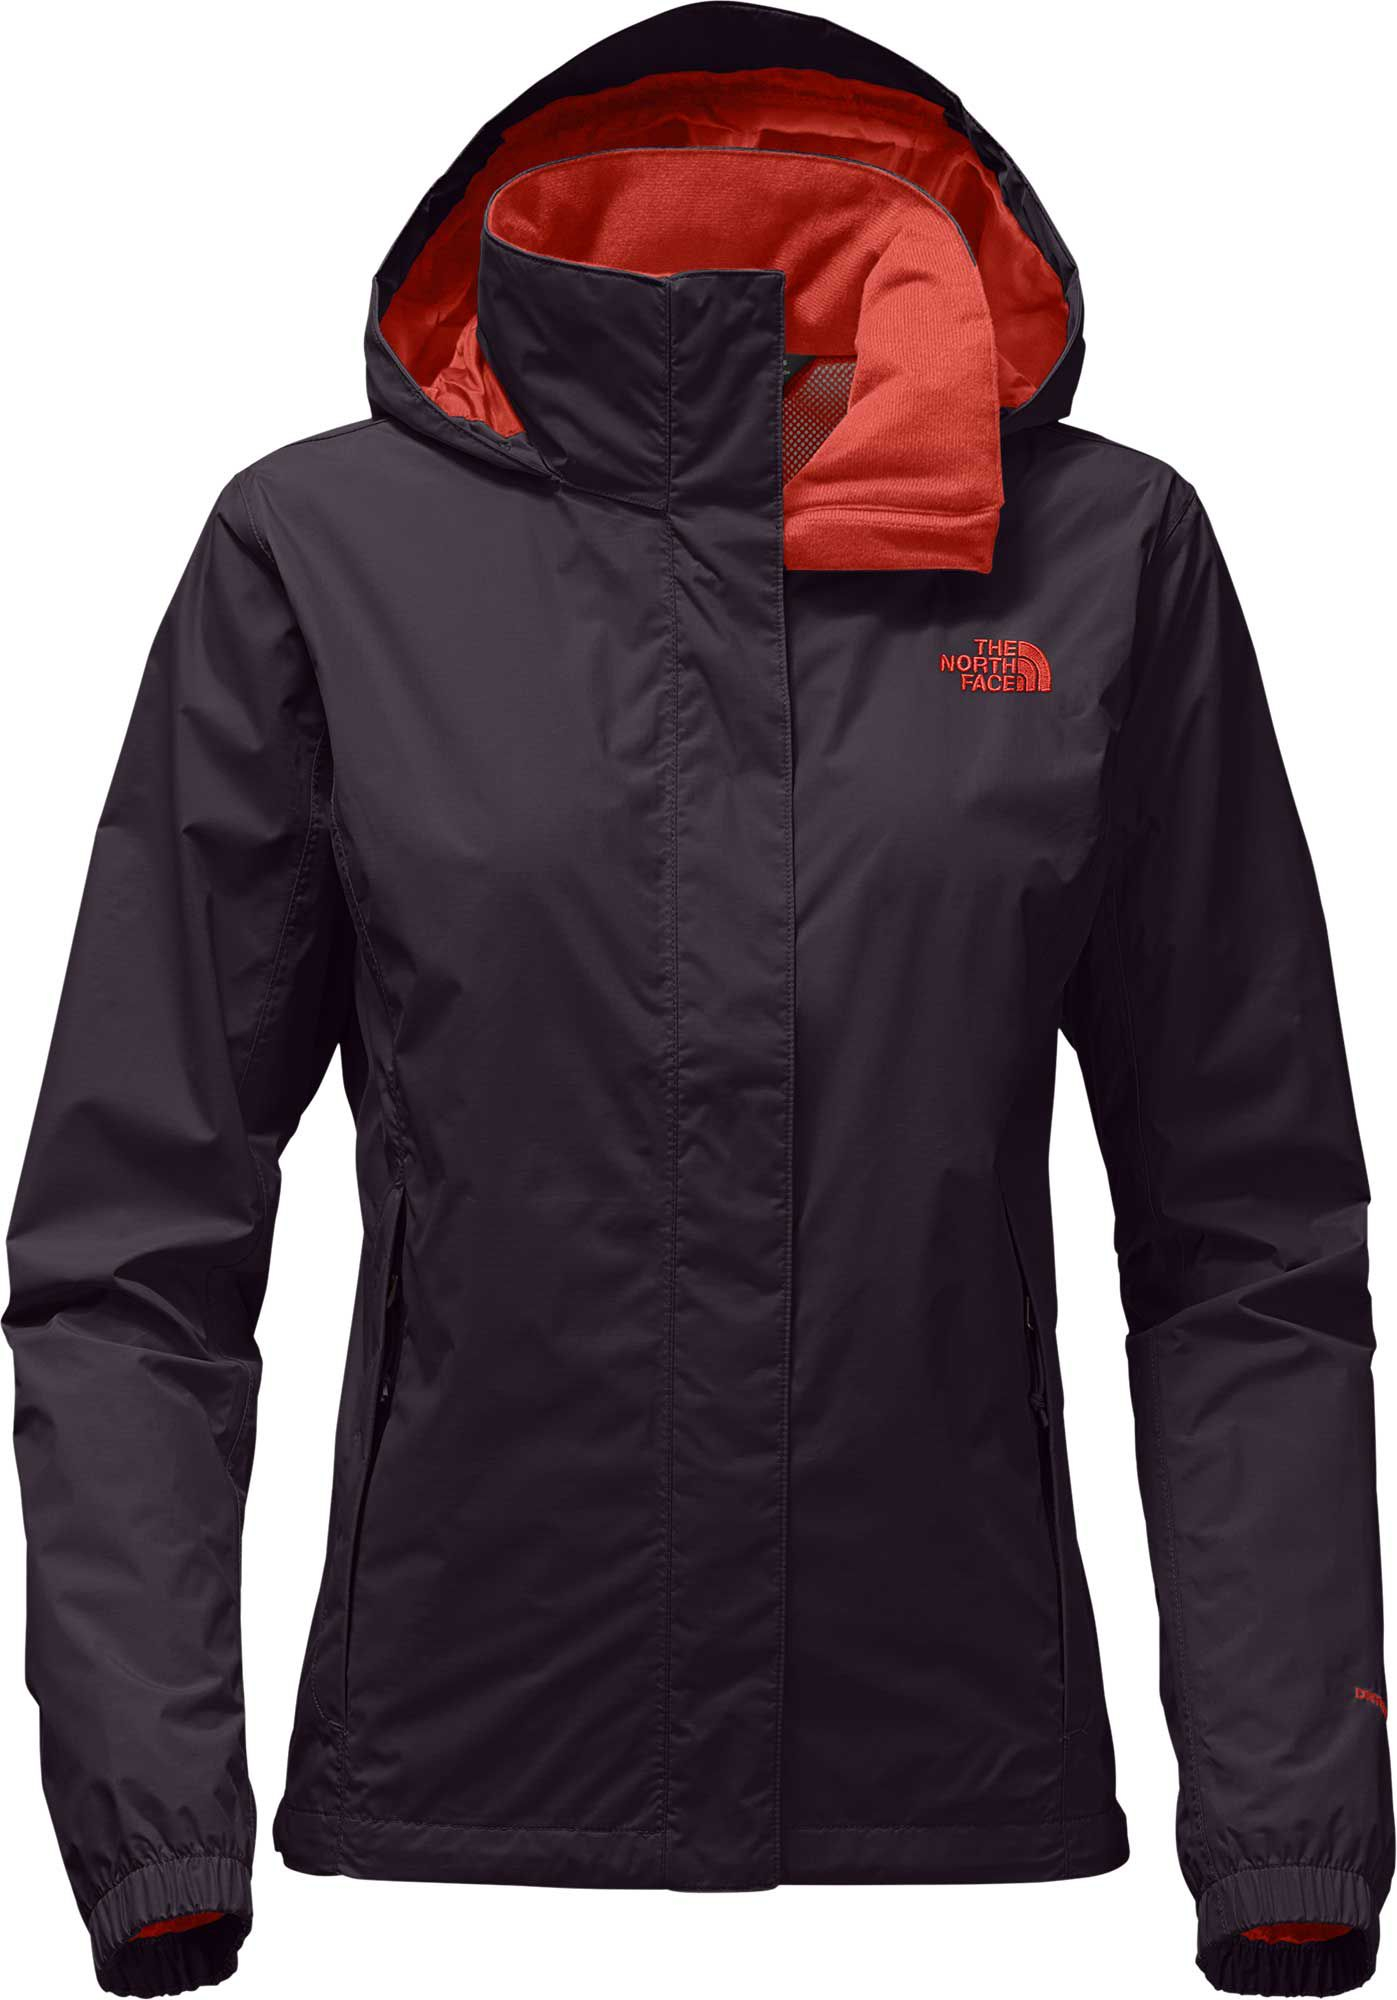 The North Face Womens Resolve 2 Waterproof Jacket £23.96 @ Costco